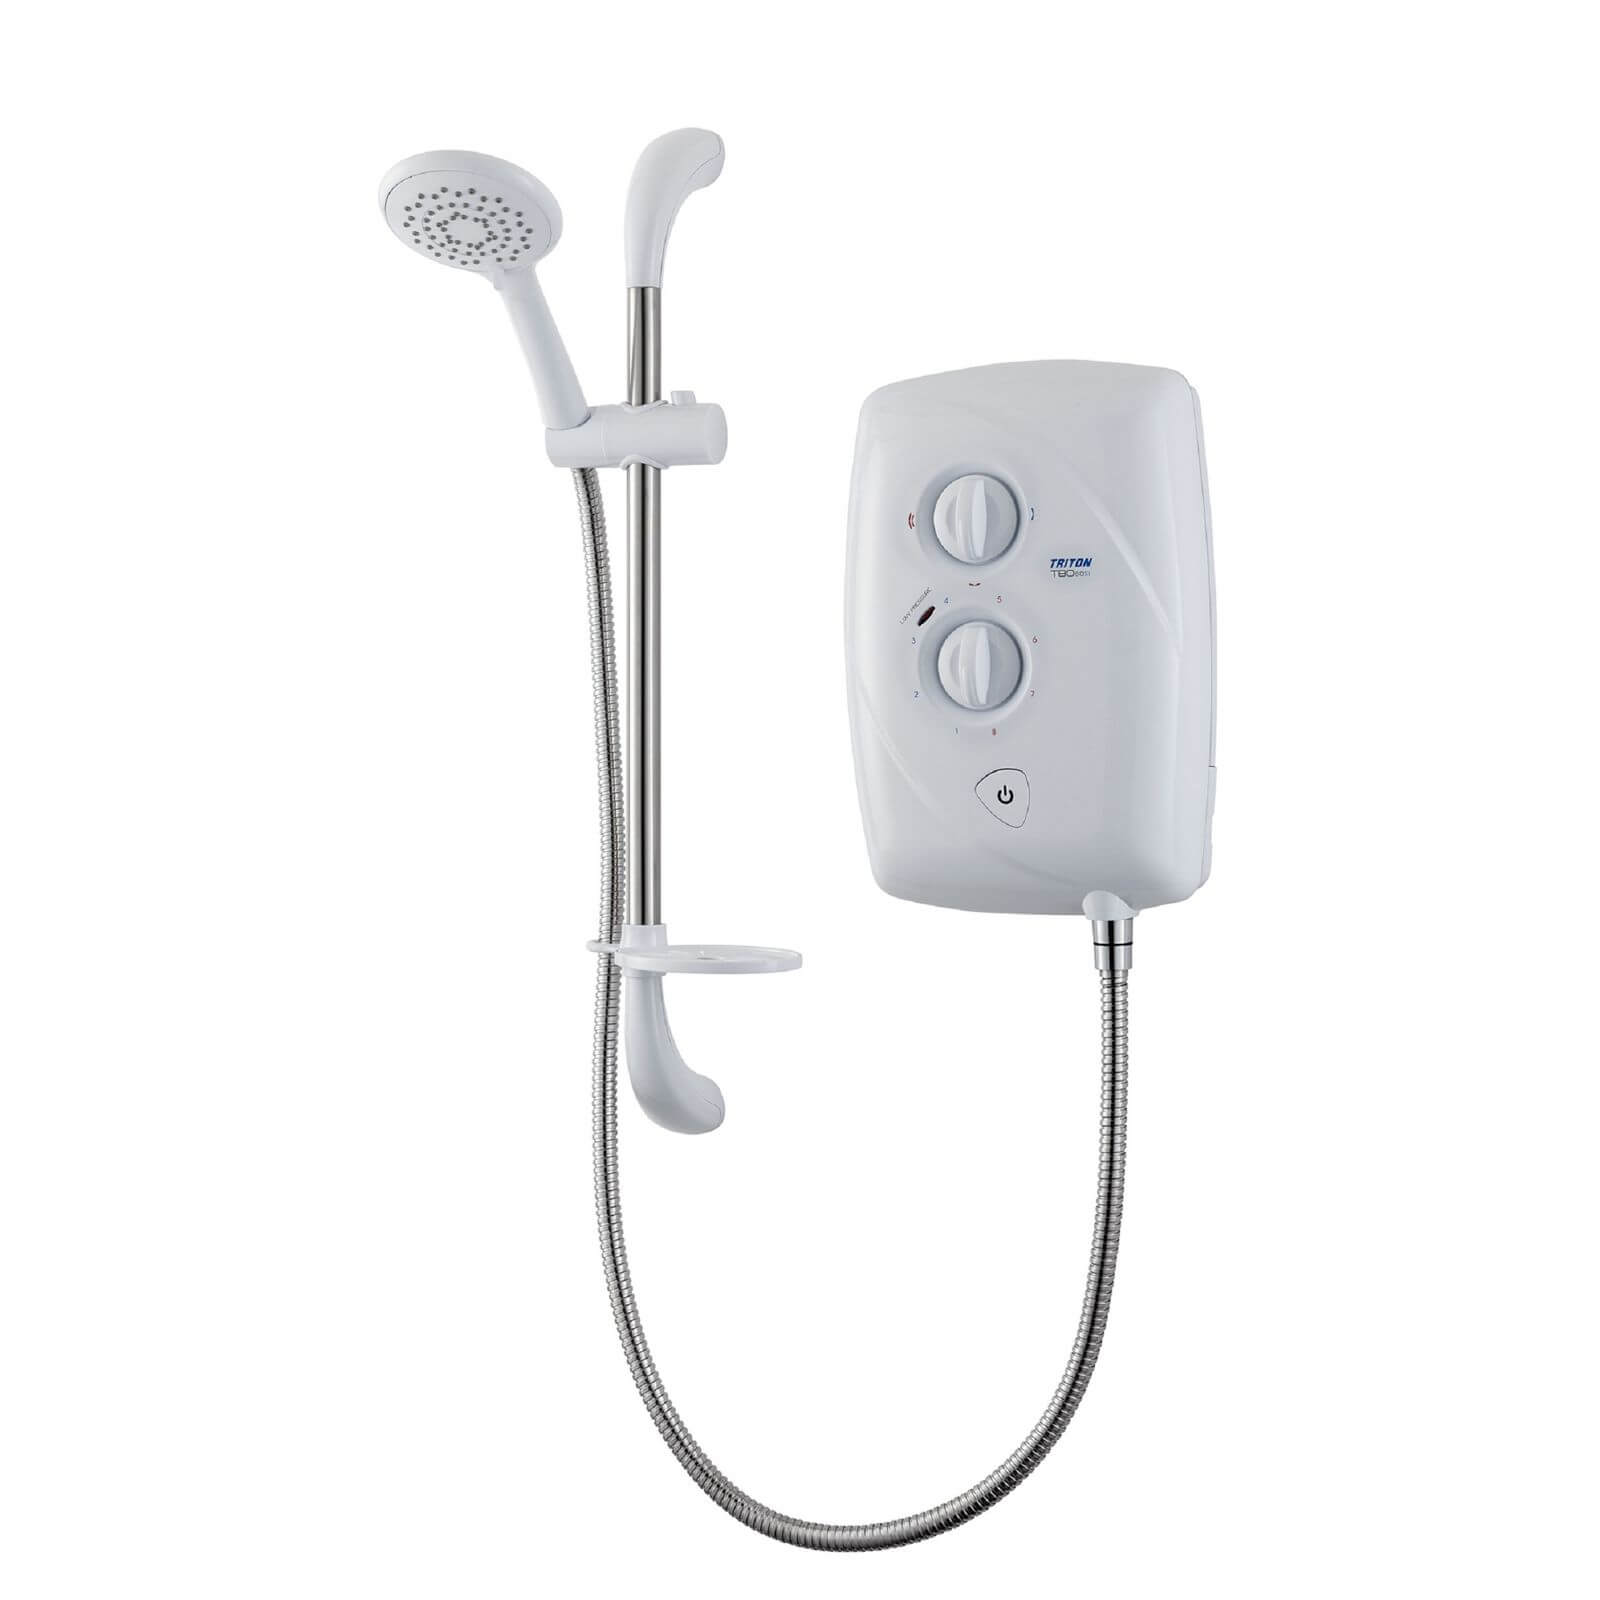 Triton T80Easi-fit 10.5kW Electric Shower - White